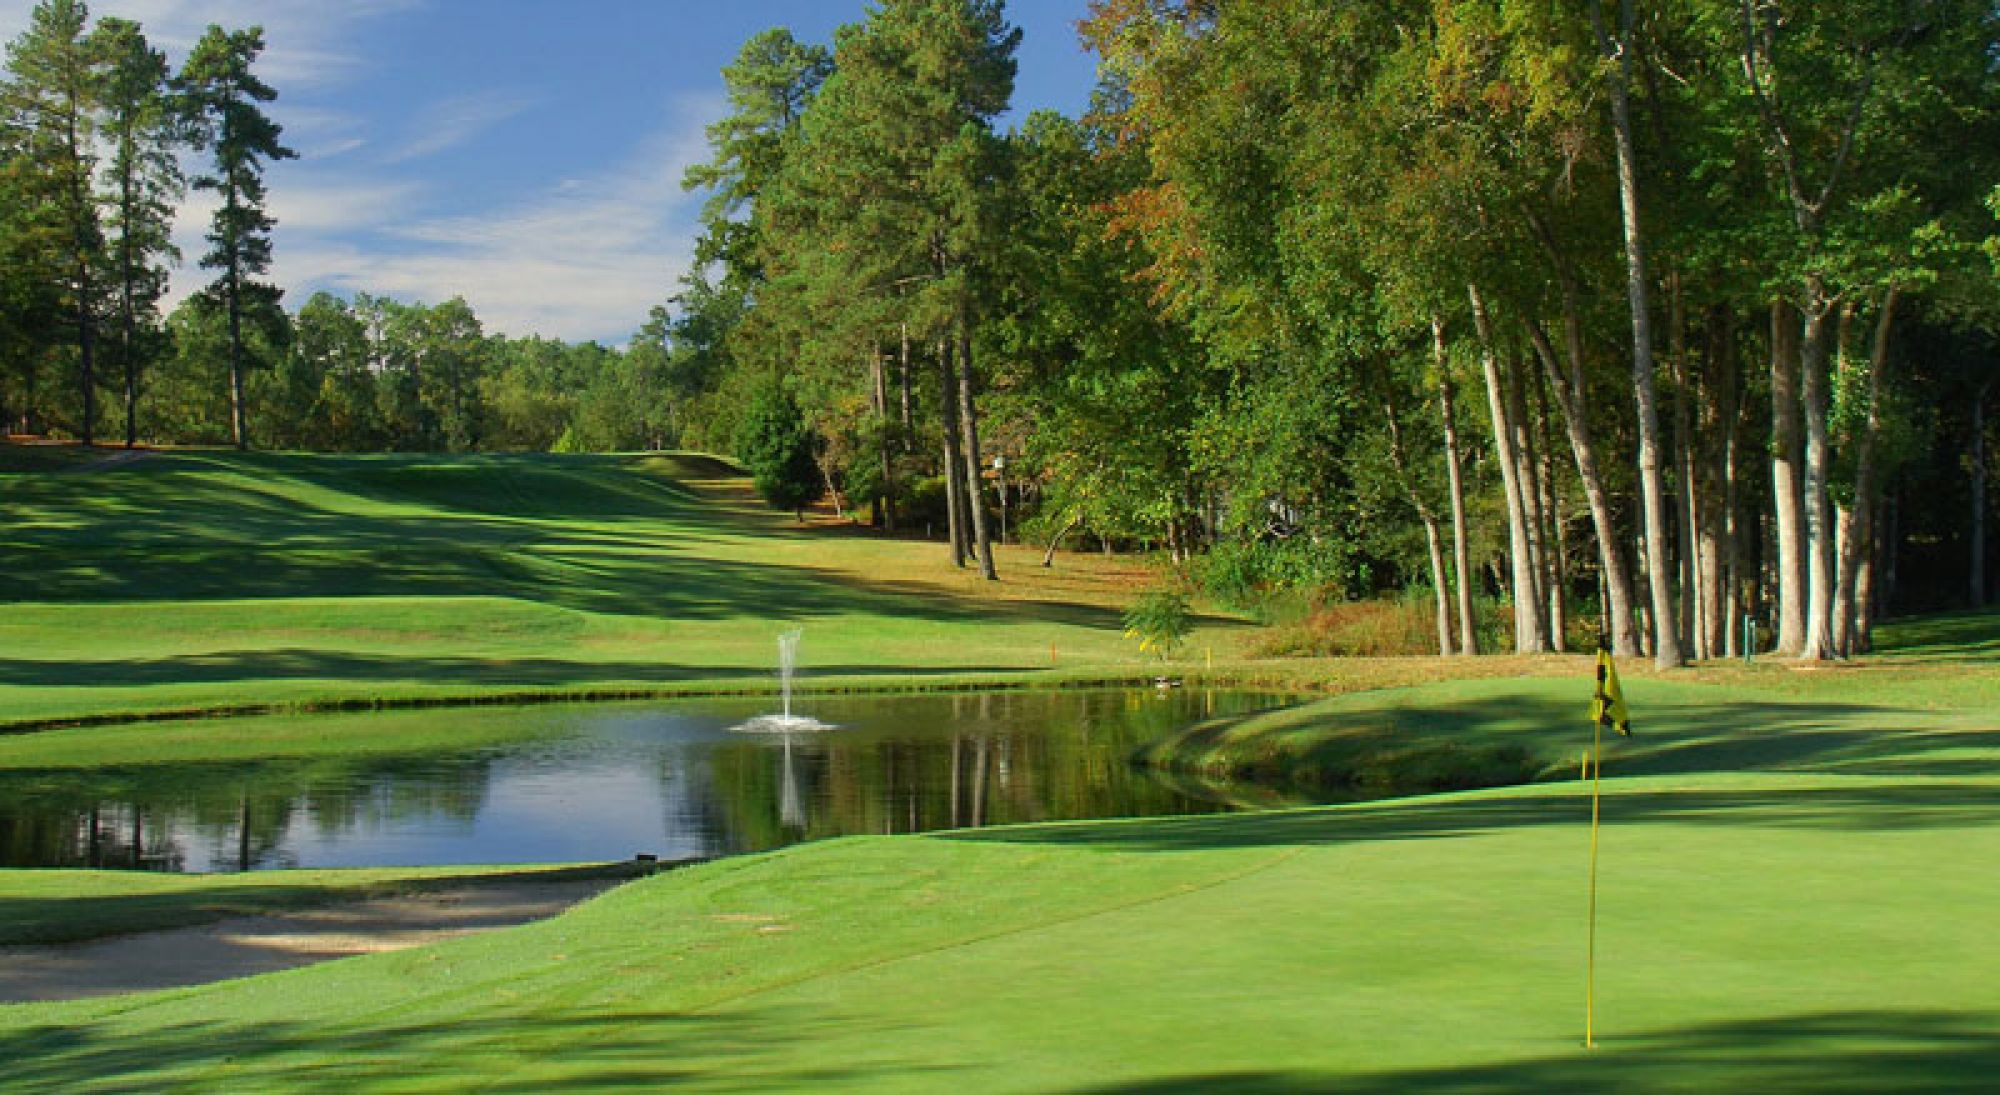 All The Pinehurst Resort Golf's picturesque golf course within stunning North Carolina.